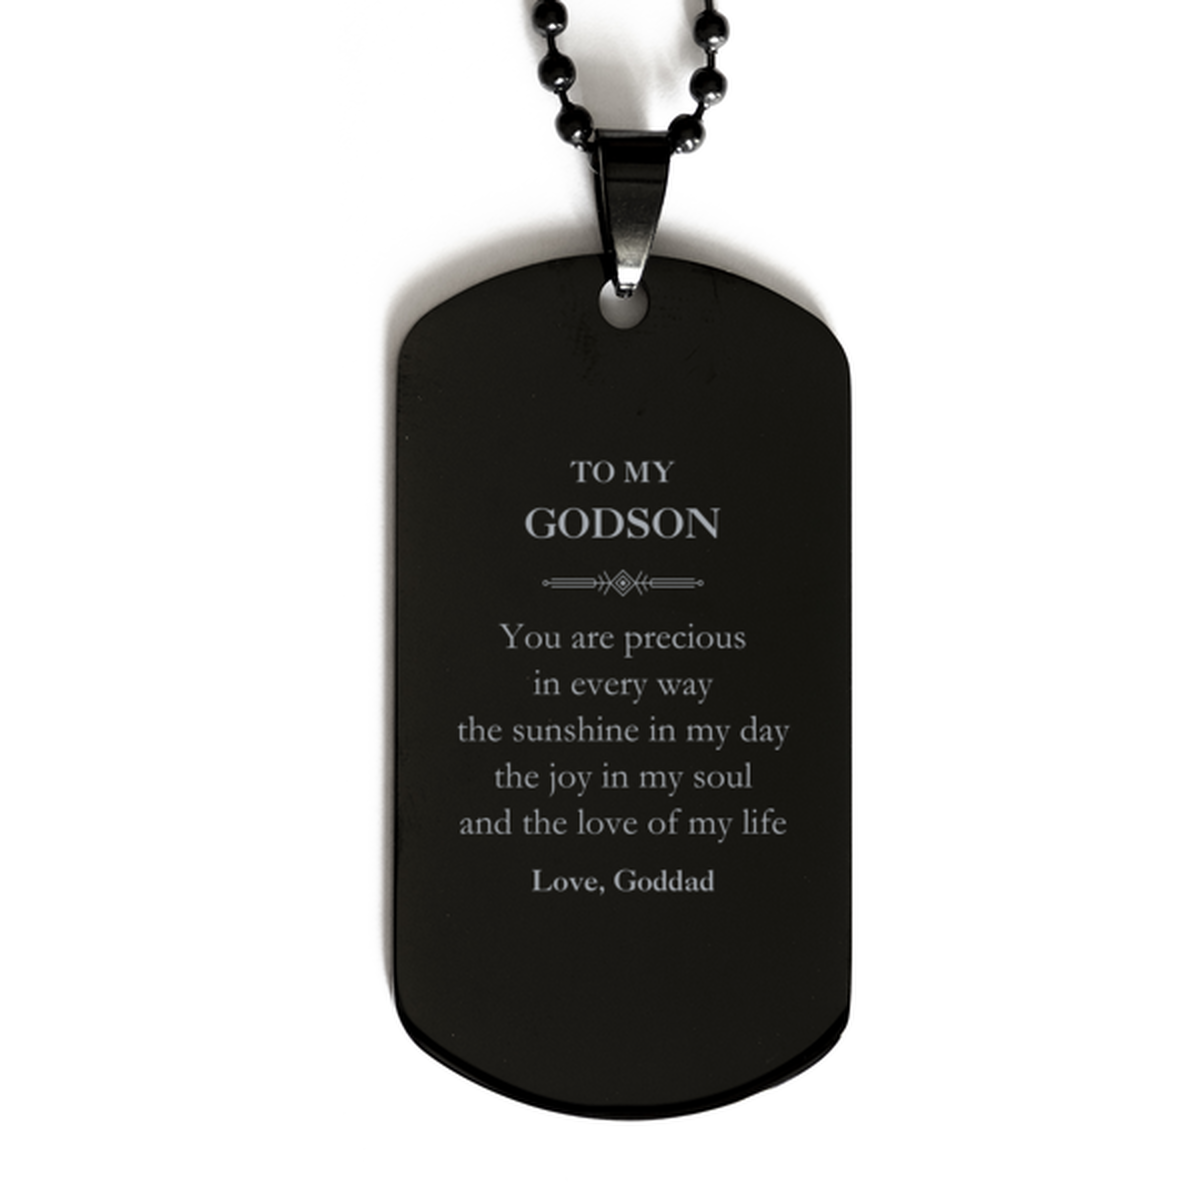 Graduation Gifts for Godson Black Dog Tag Present from Goddad, Christmas Godson Birthday Gifts Godson You are precious in every way the sunshine in my day. Love, Goddad